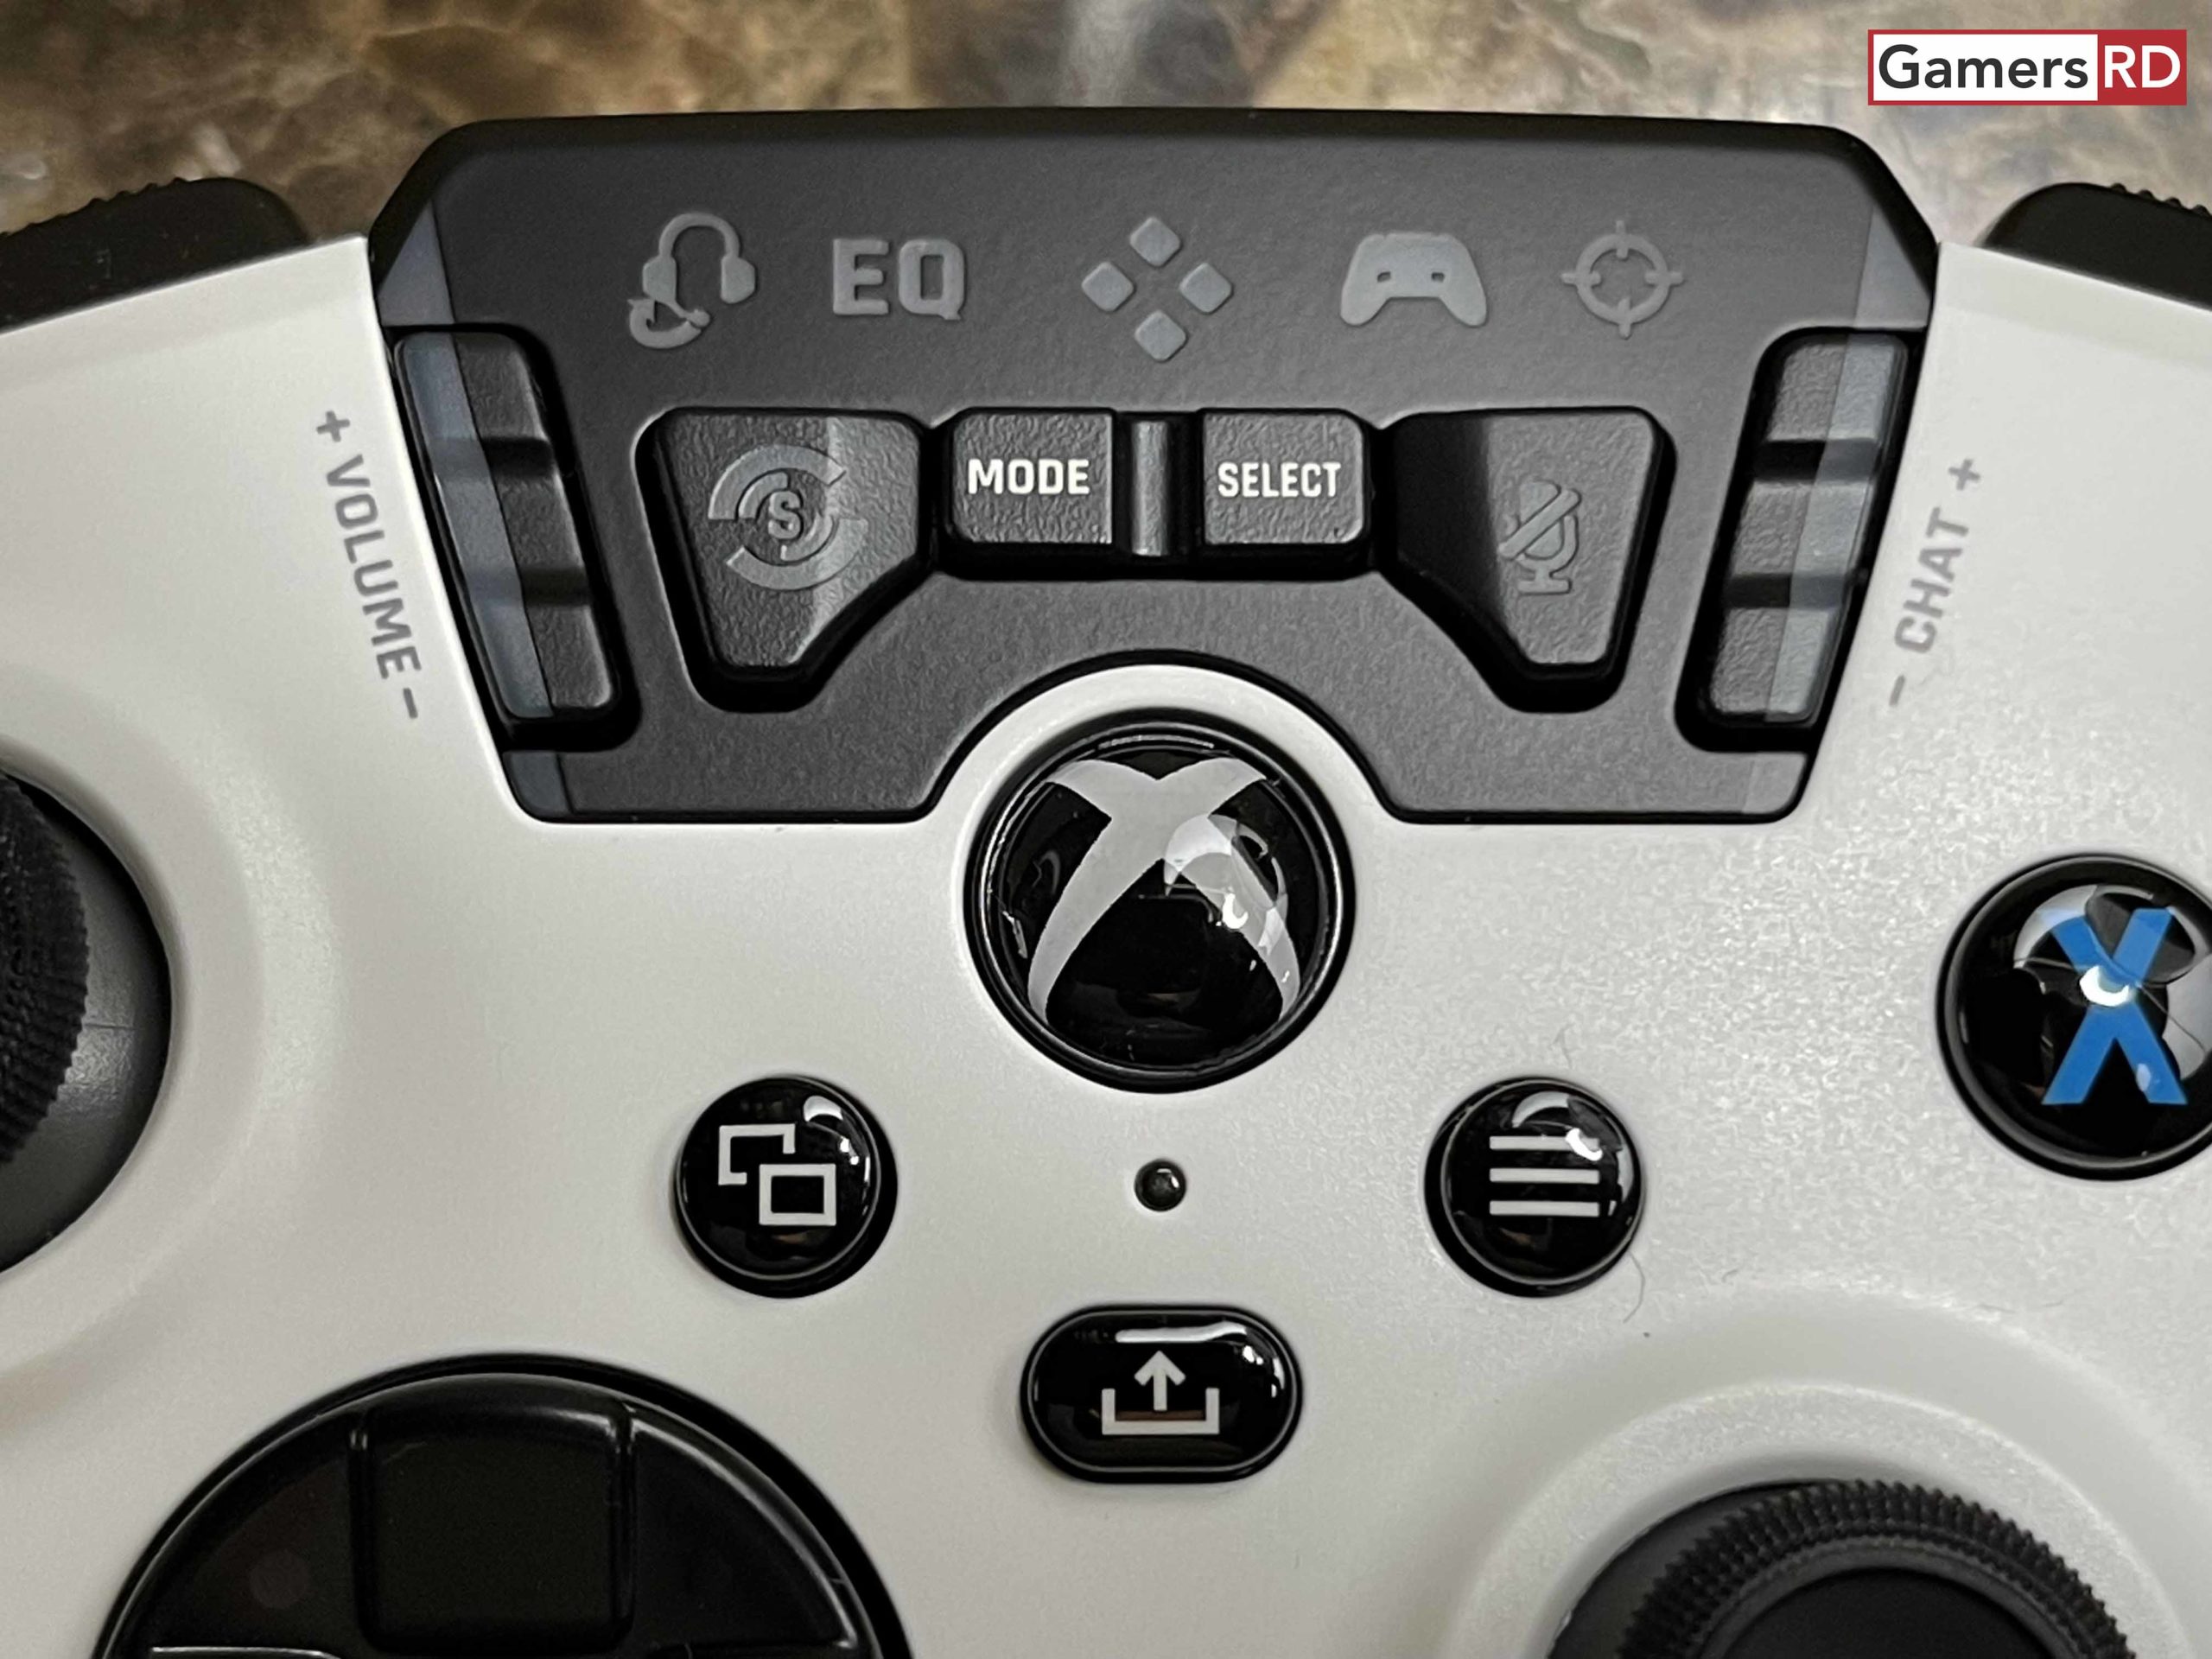 Turtle Beach Recon Controller Review, 4 GamersRD